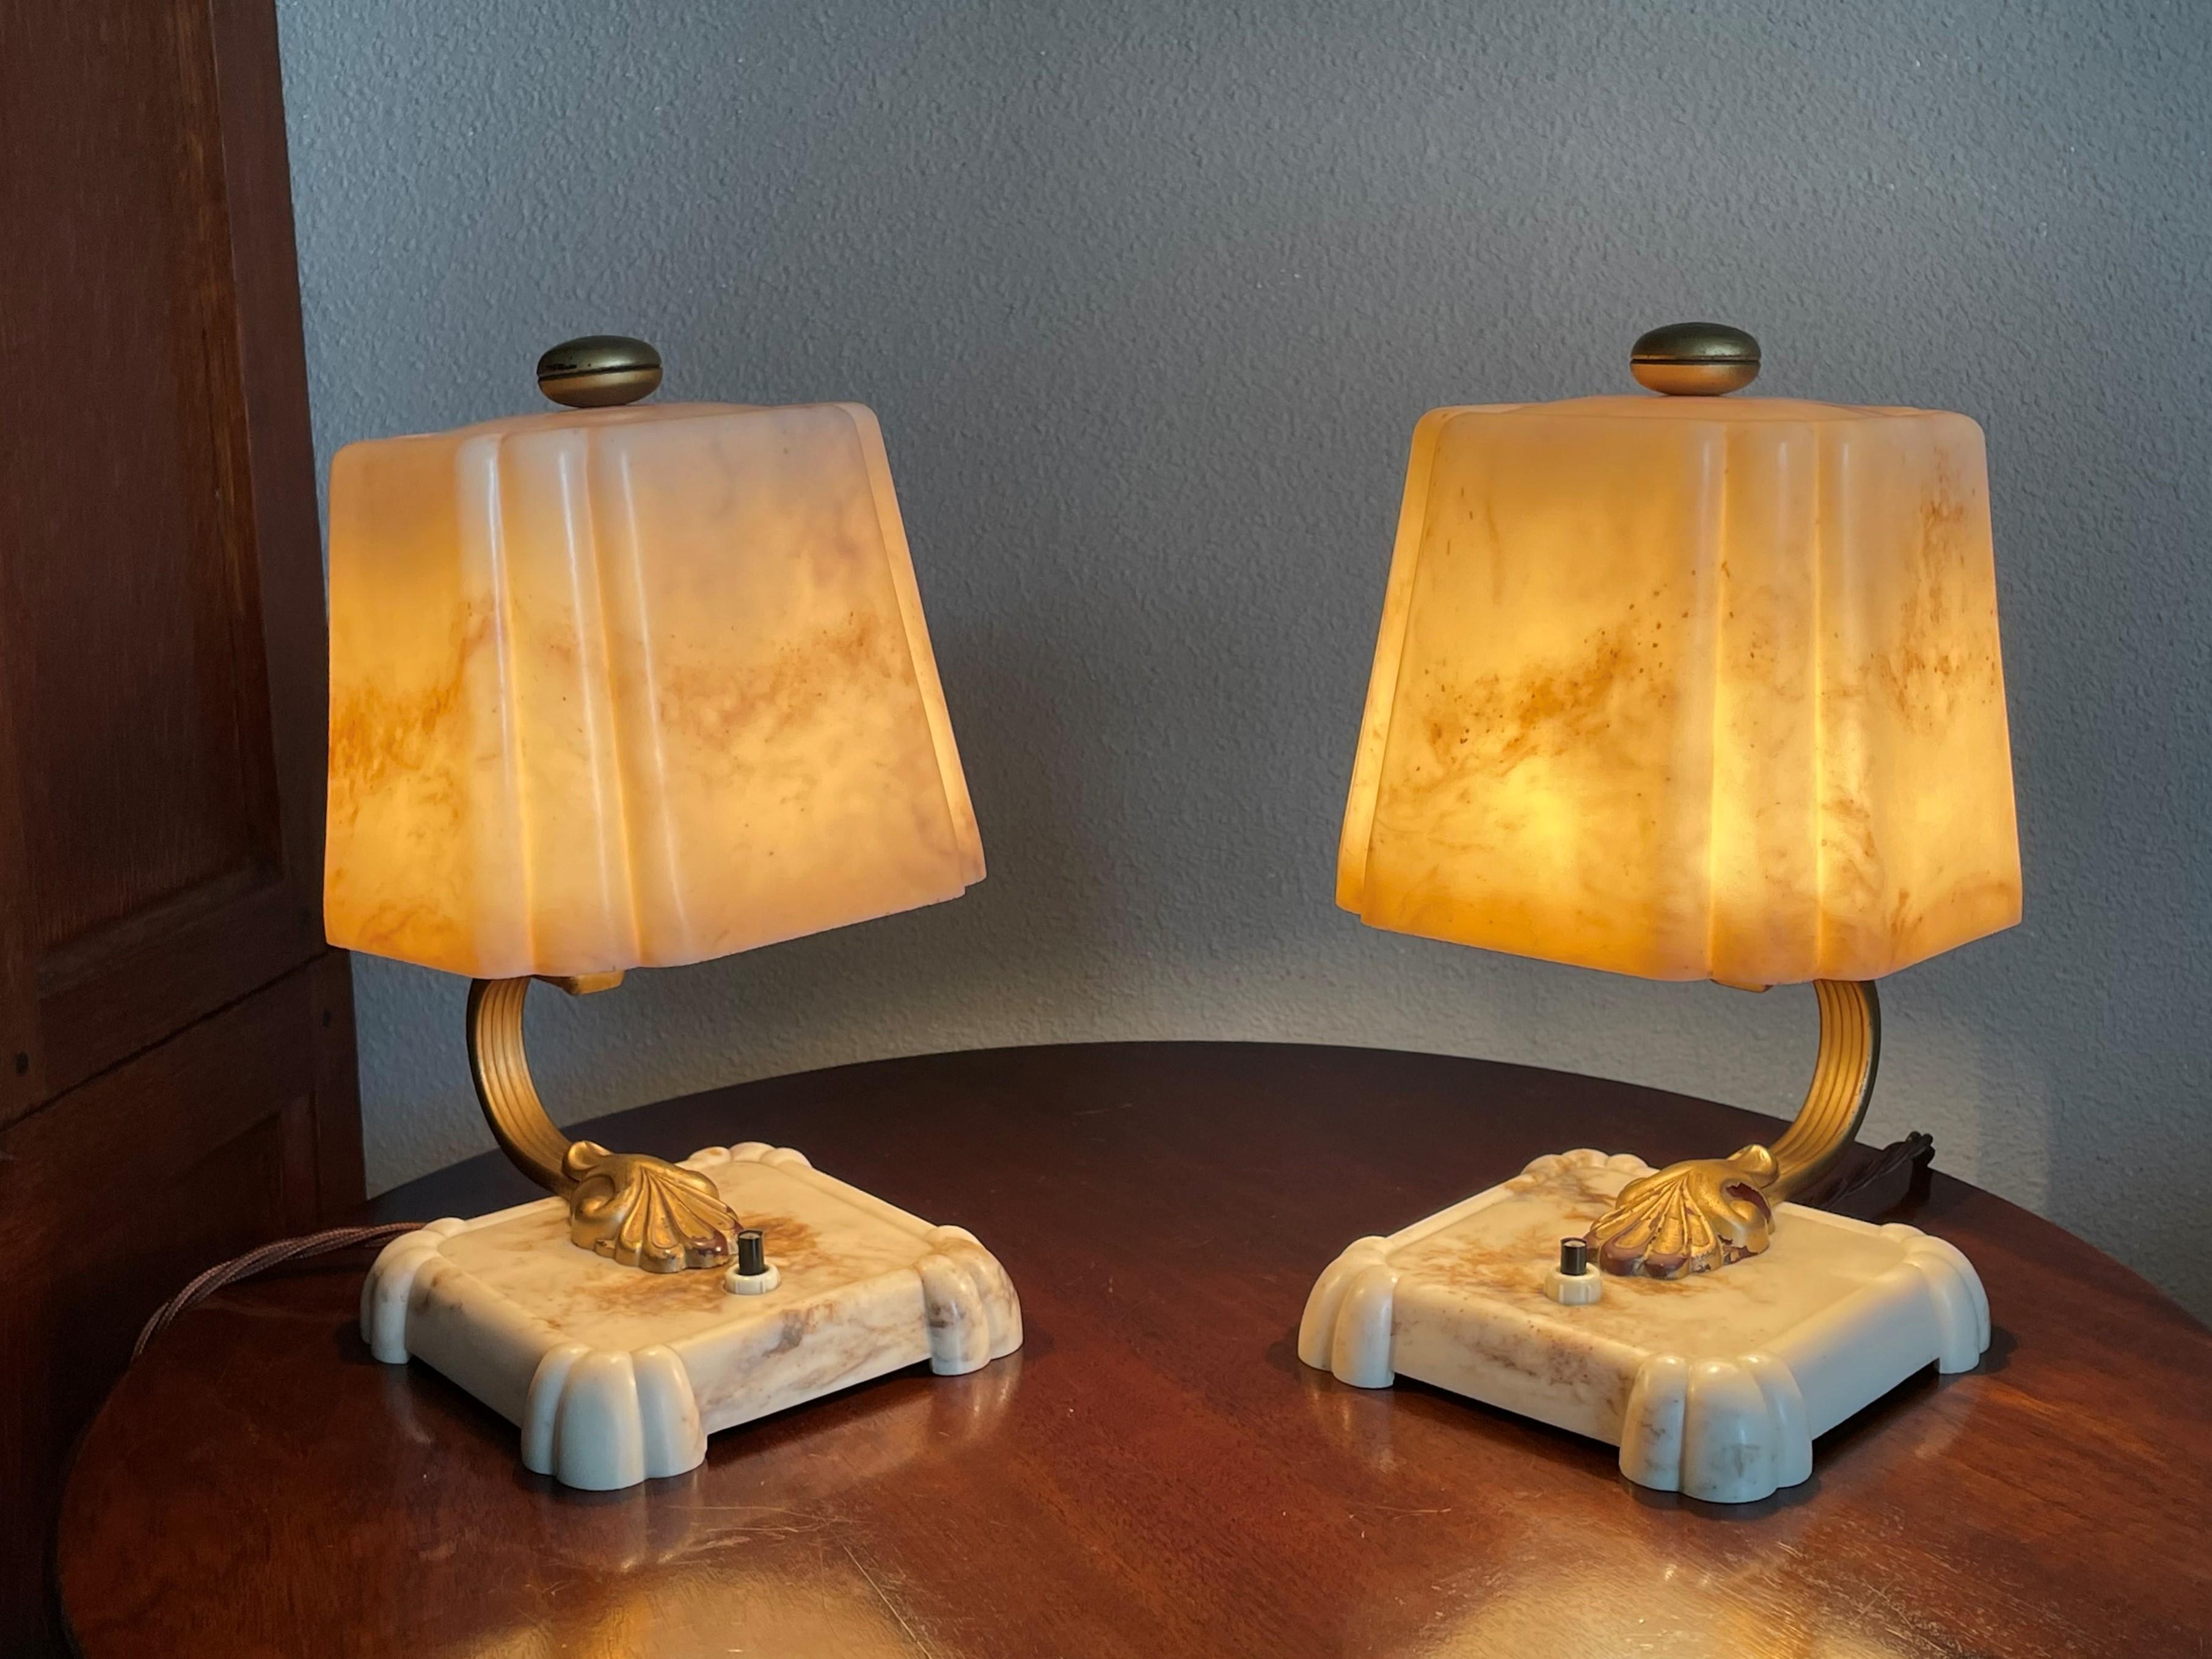 Stunning and Rare Pair of 1930s Art Deco Table or Bedside Lamps Made of Bakelite 8